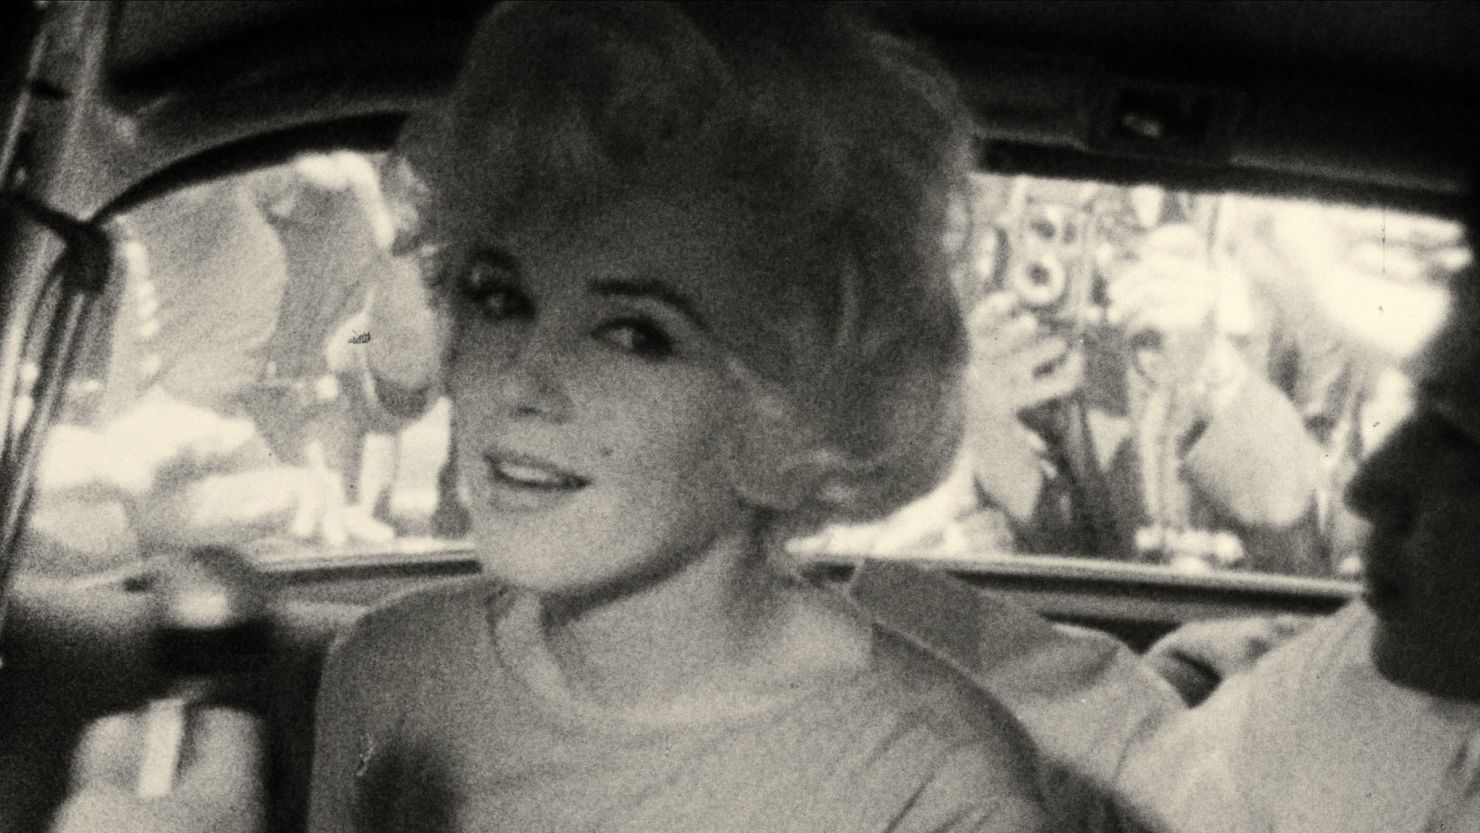 Marilyn Monroe, Biography, Death, Movies, & Facts